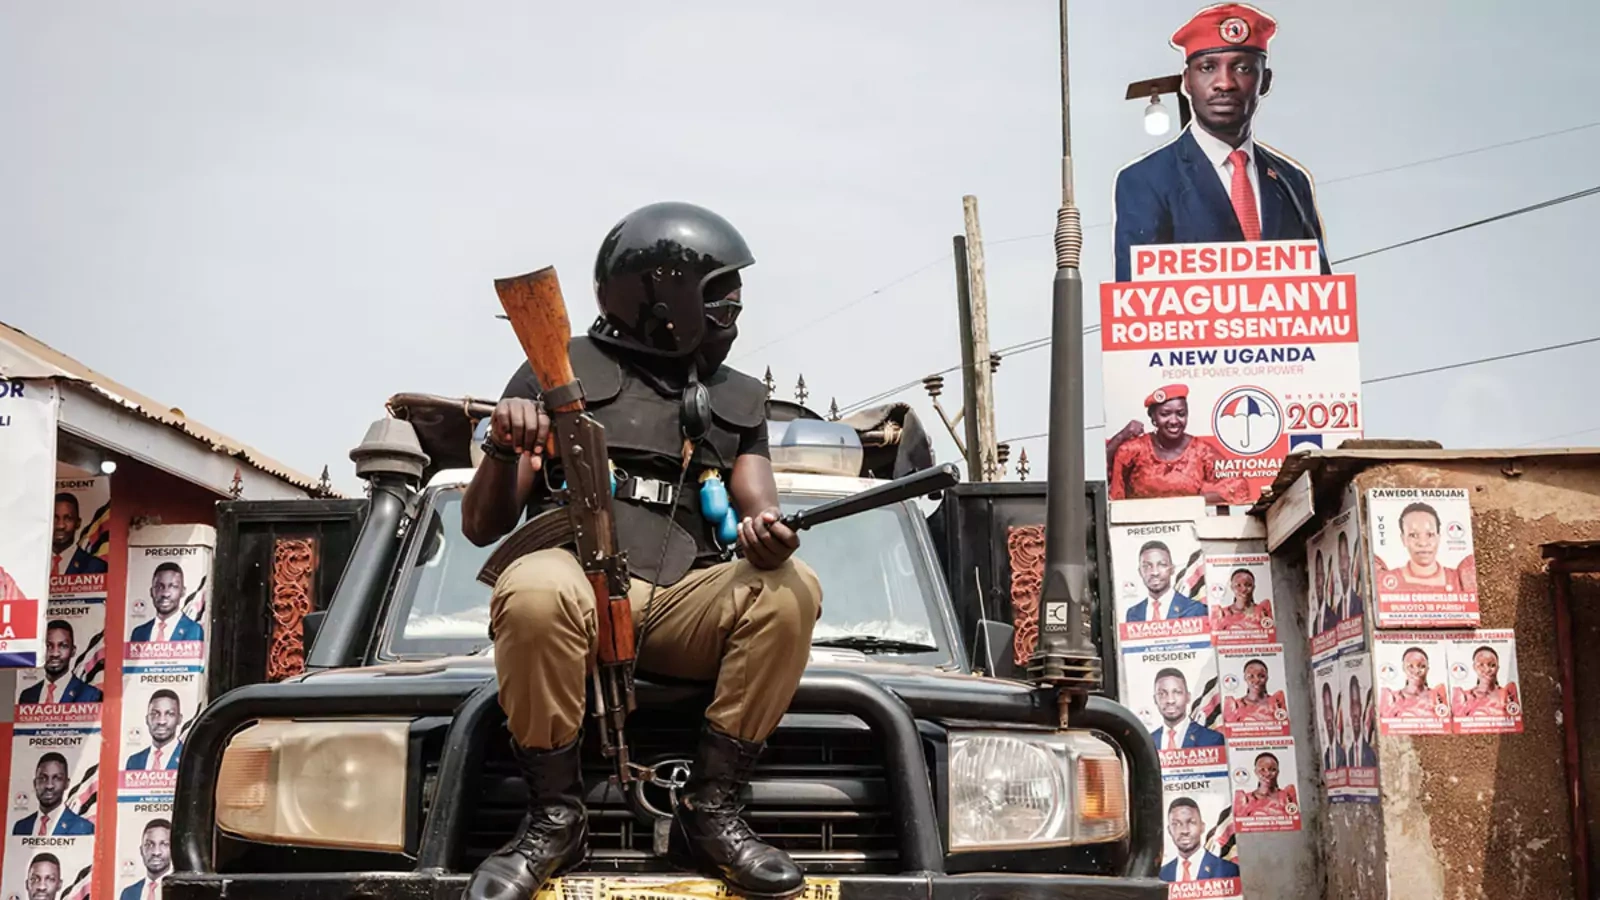 A police officer sits on a car at the headquarters of the National Unity Platform in Kampala, Uganda, in January 2021.